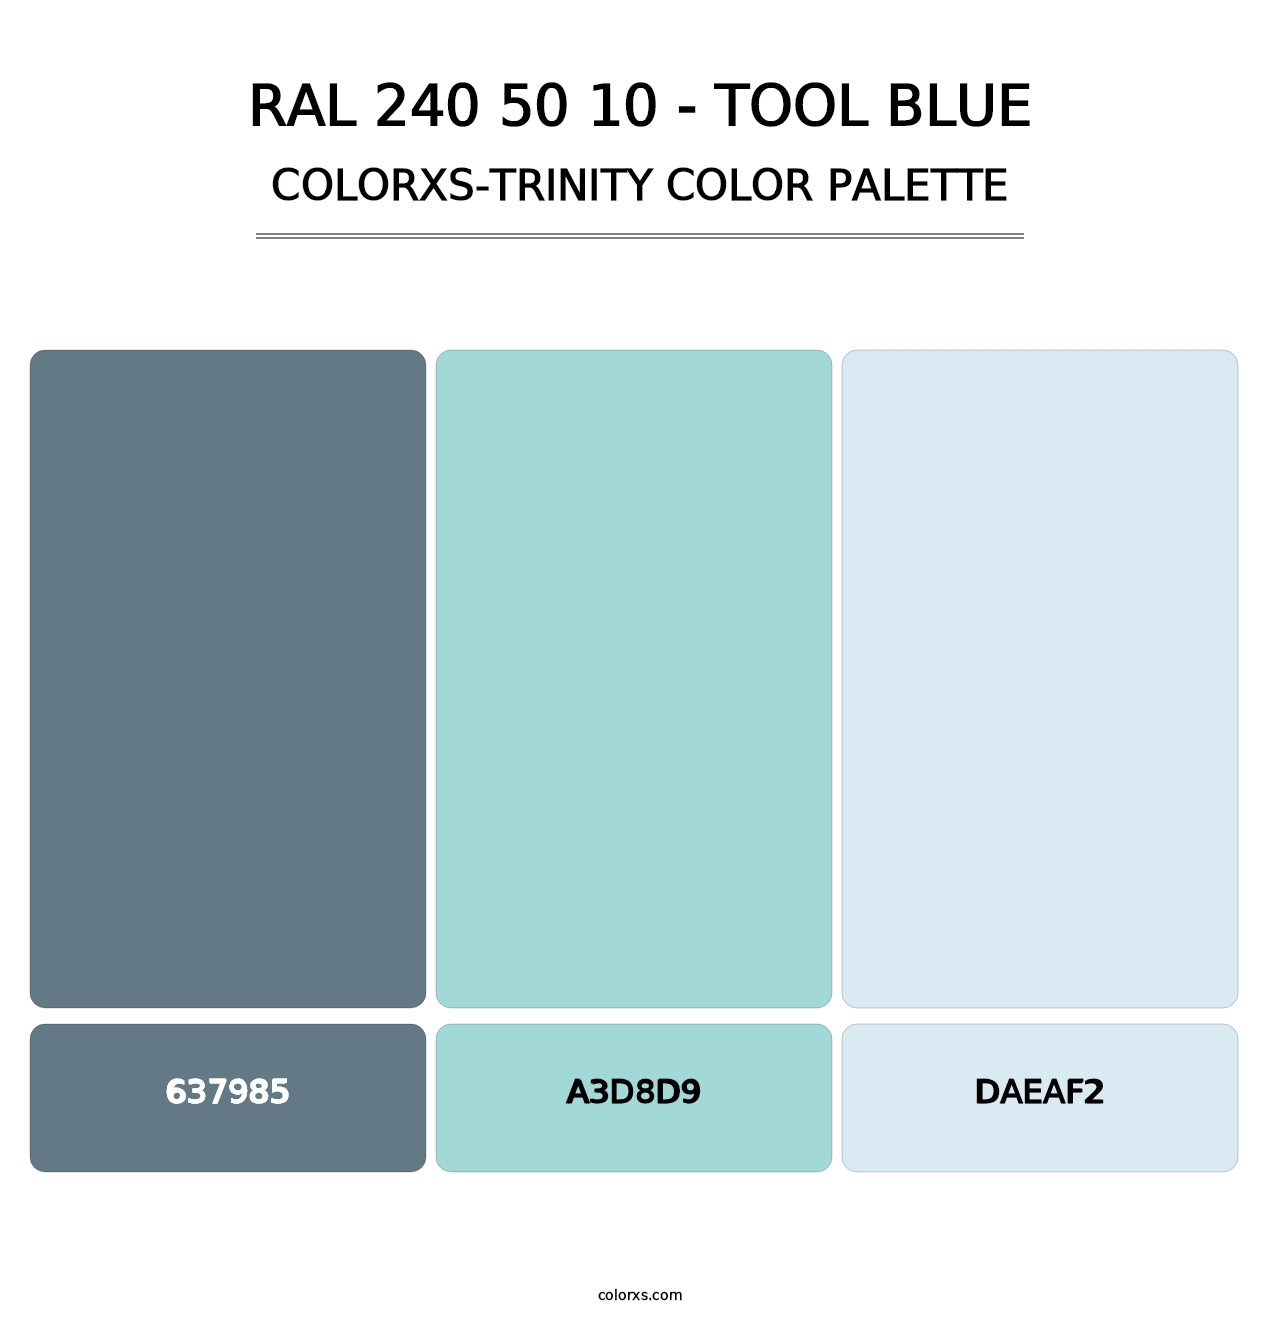 RAL 240 50 10 - Tool Blue - Colorxs Trinity Palette